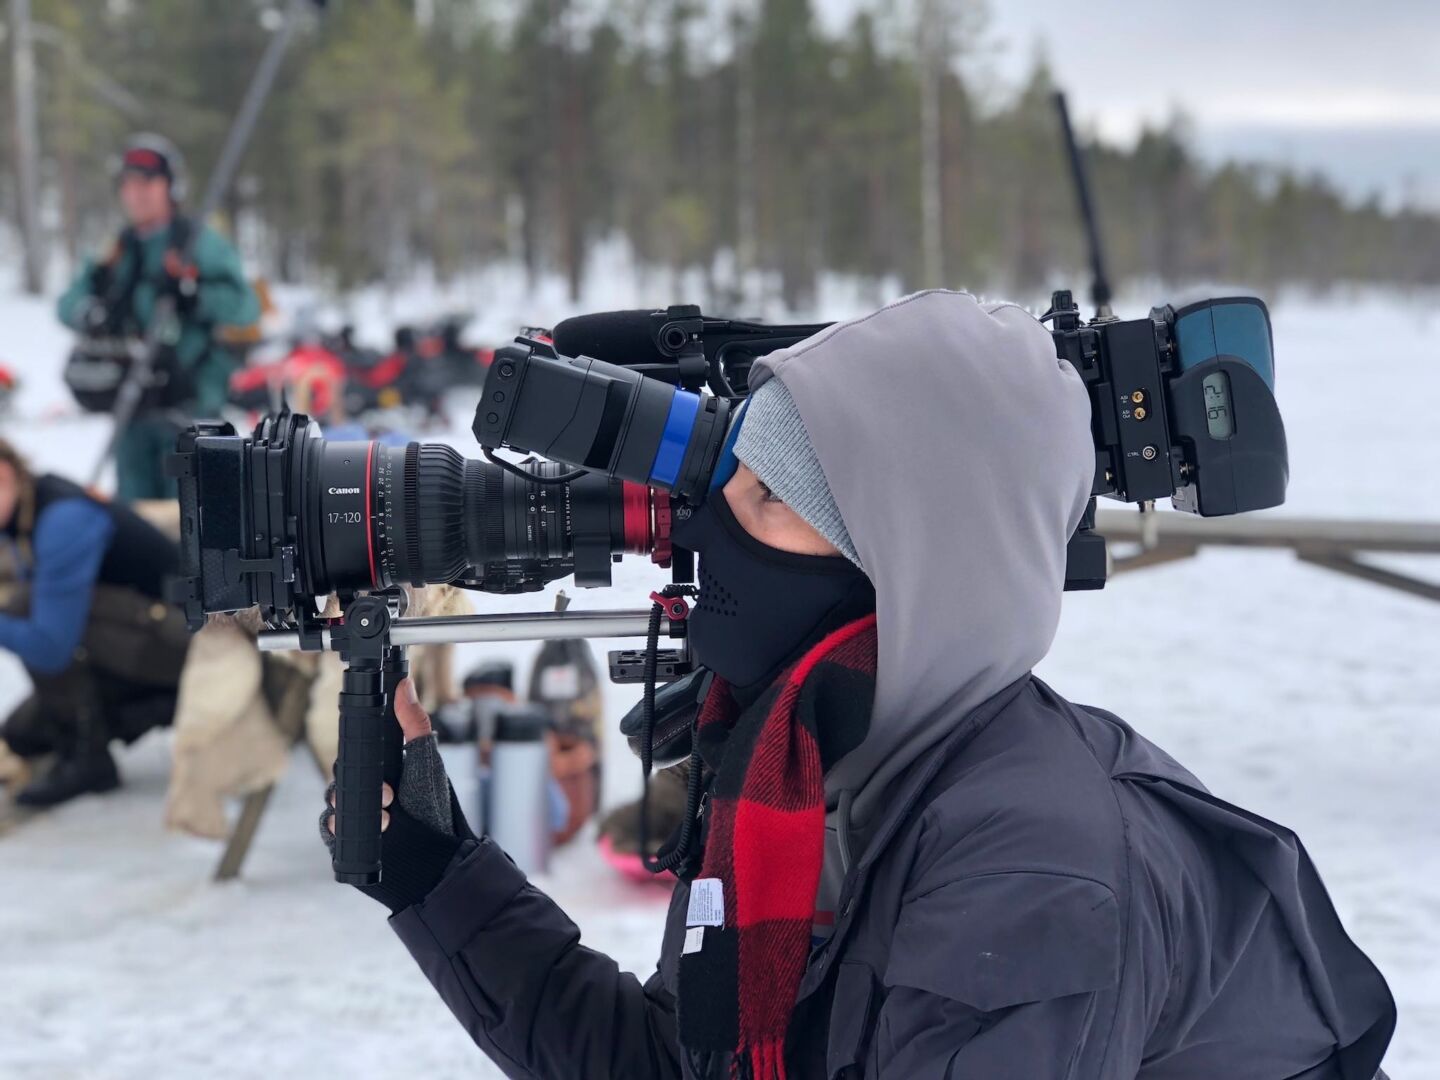 Filming reality show Keeping Up With the Kardashians KUWTK in Finnish Lapland in winter